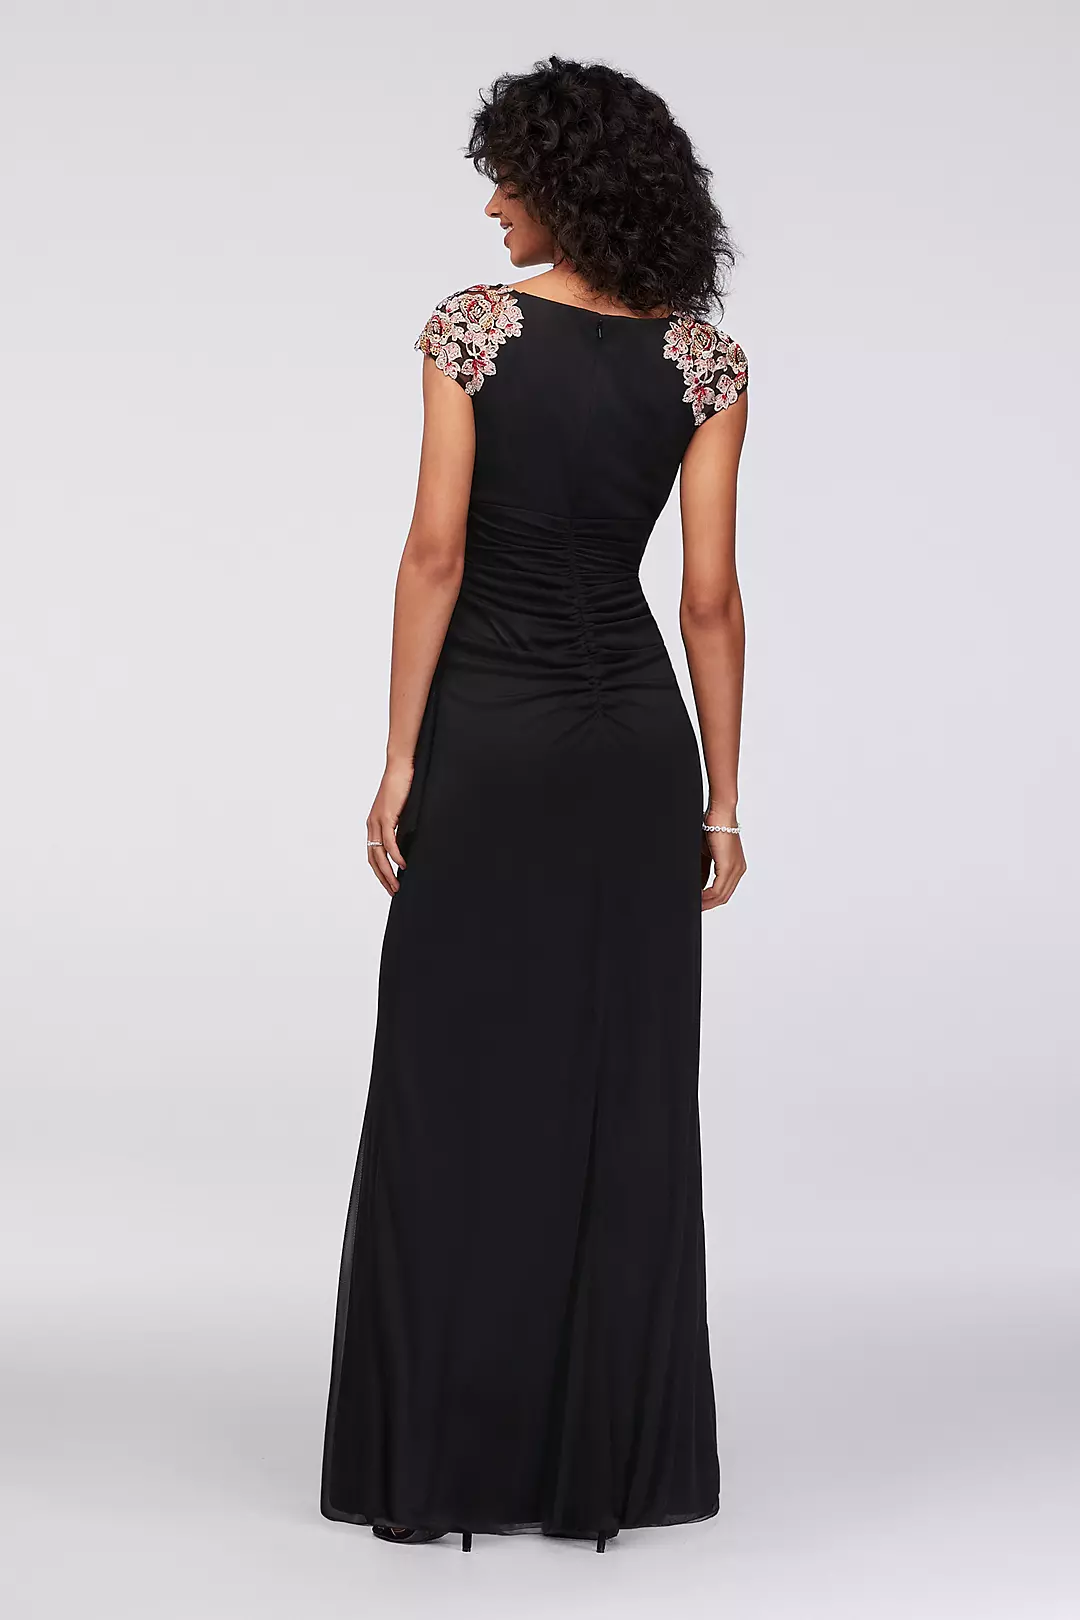 Floral Appliqued Sheath Gown with Ruched Skirt Image 2